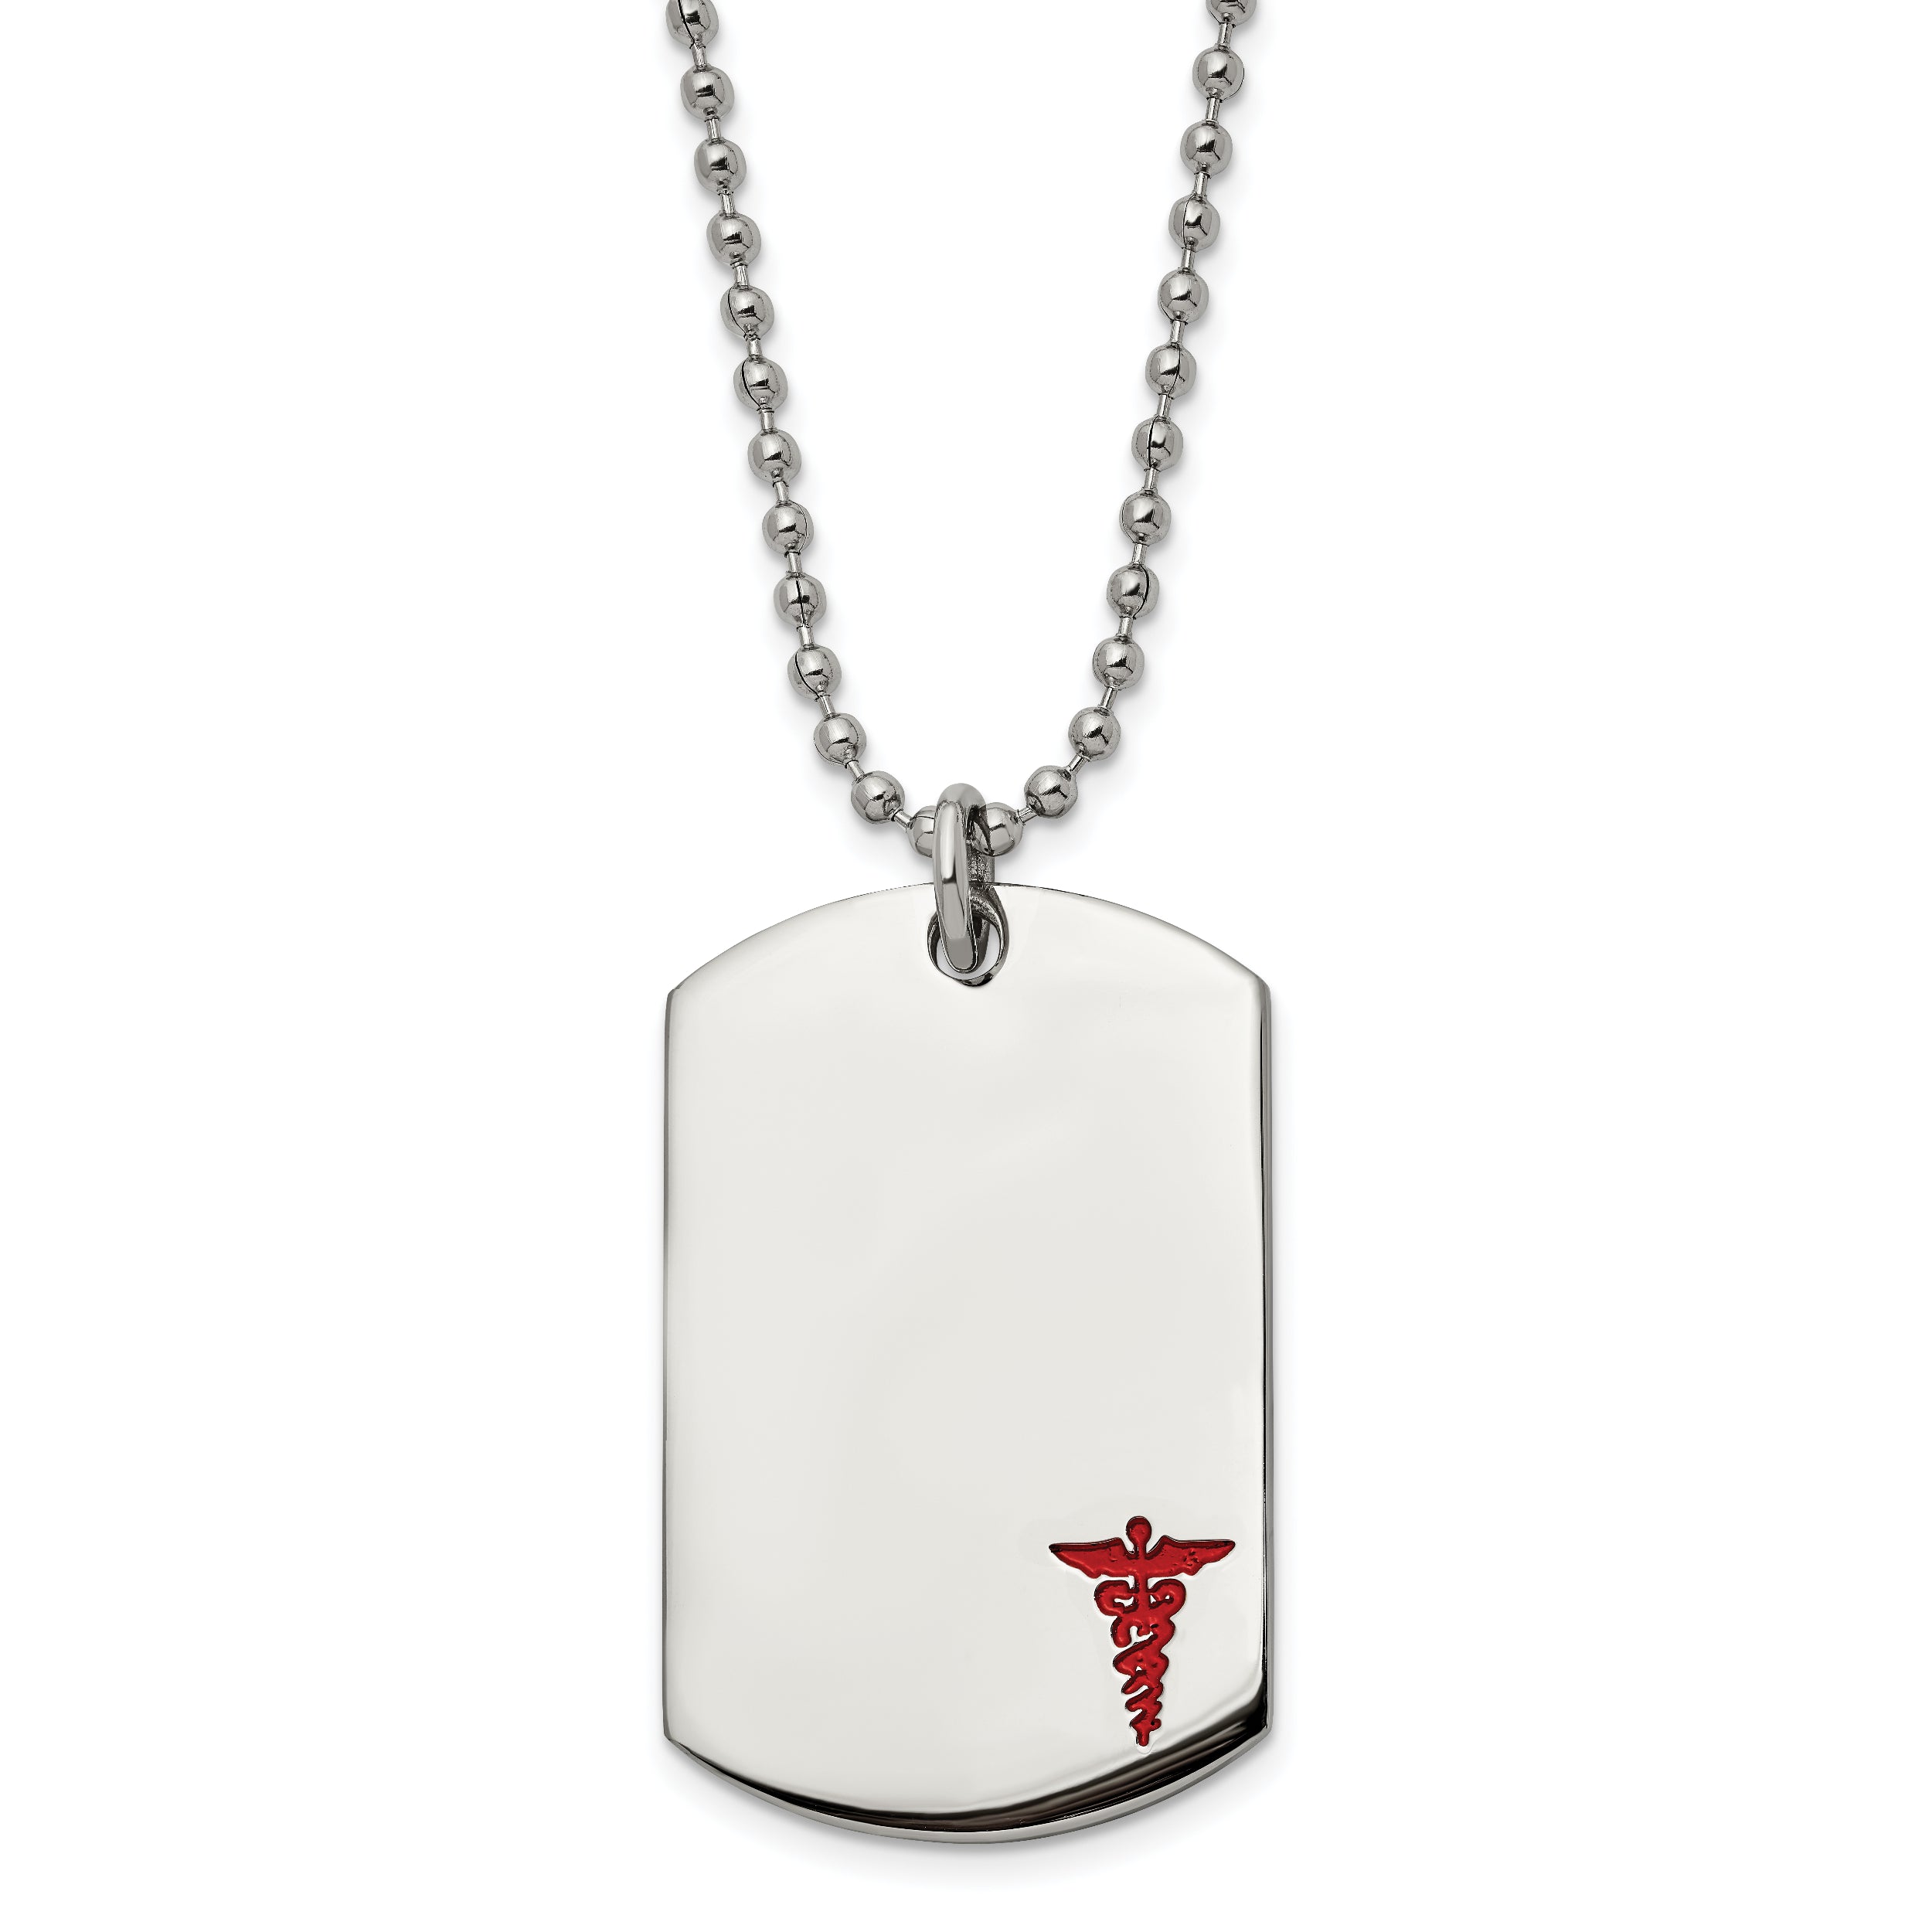 Chisel Stainless Steel Polished with Red Enamel Medical ID Dog Tag on a 24 inch Ball Chain Necklace